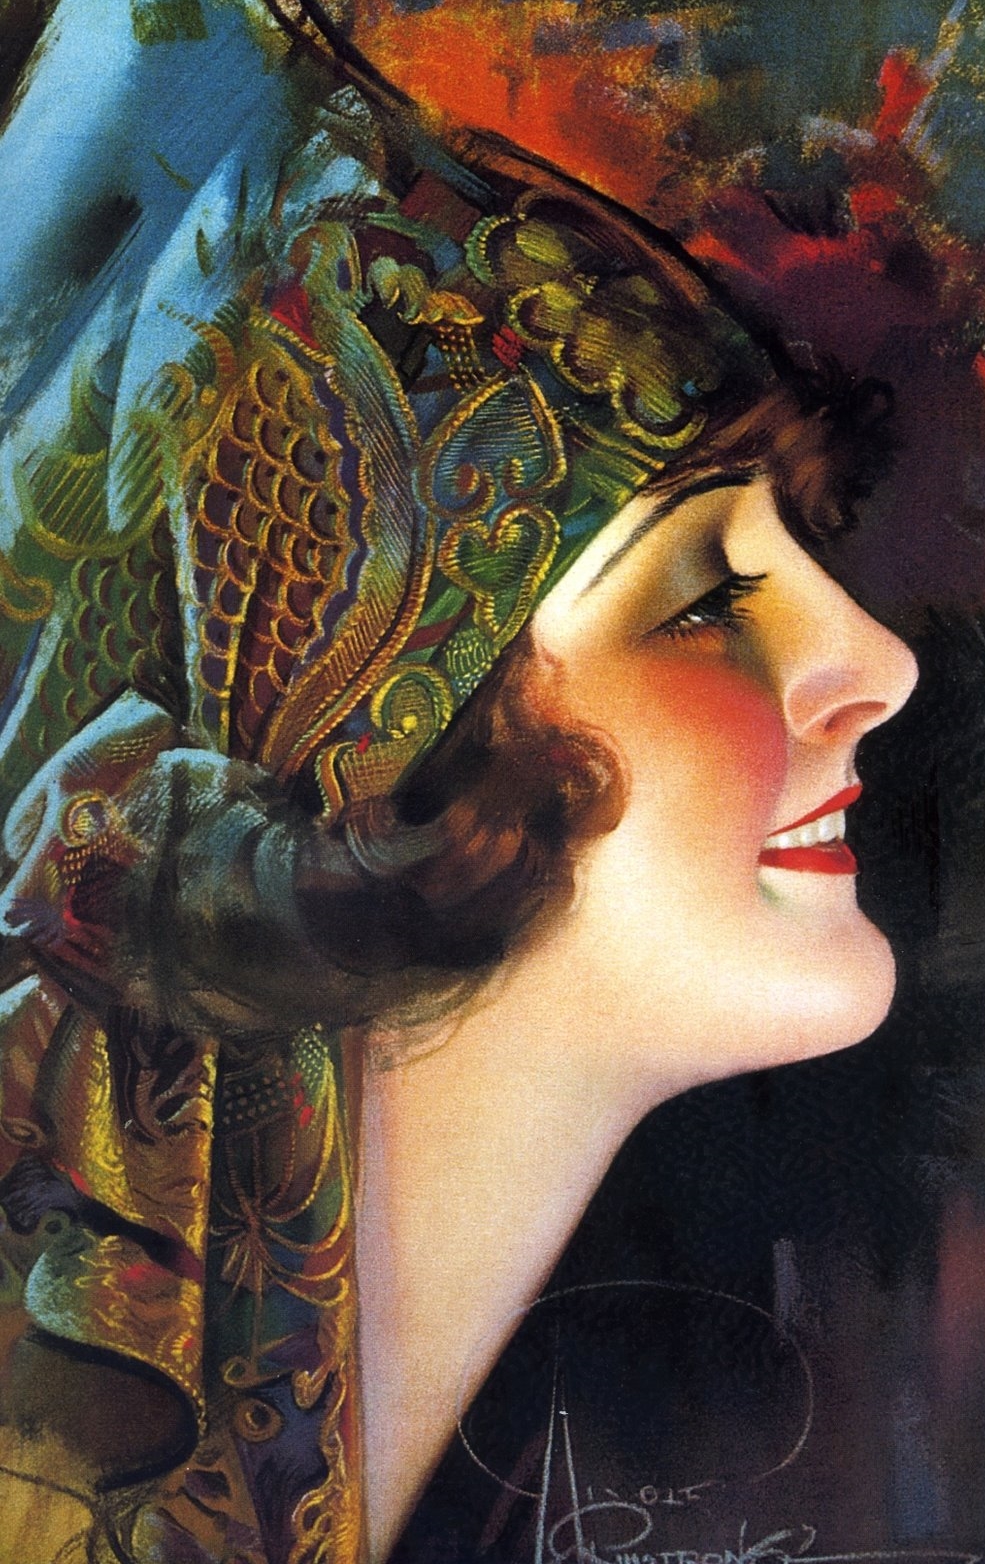 Rolf ARMSTRONG ~ Pin-up Art - Catherine La Rose (13)